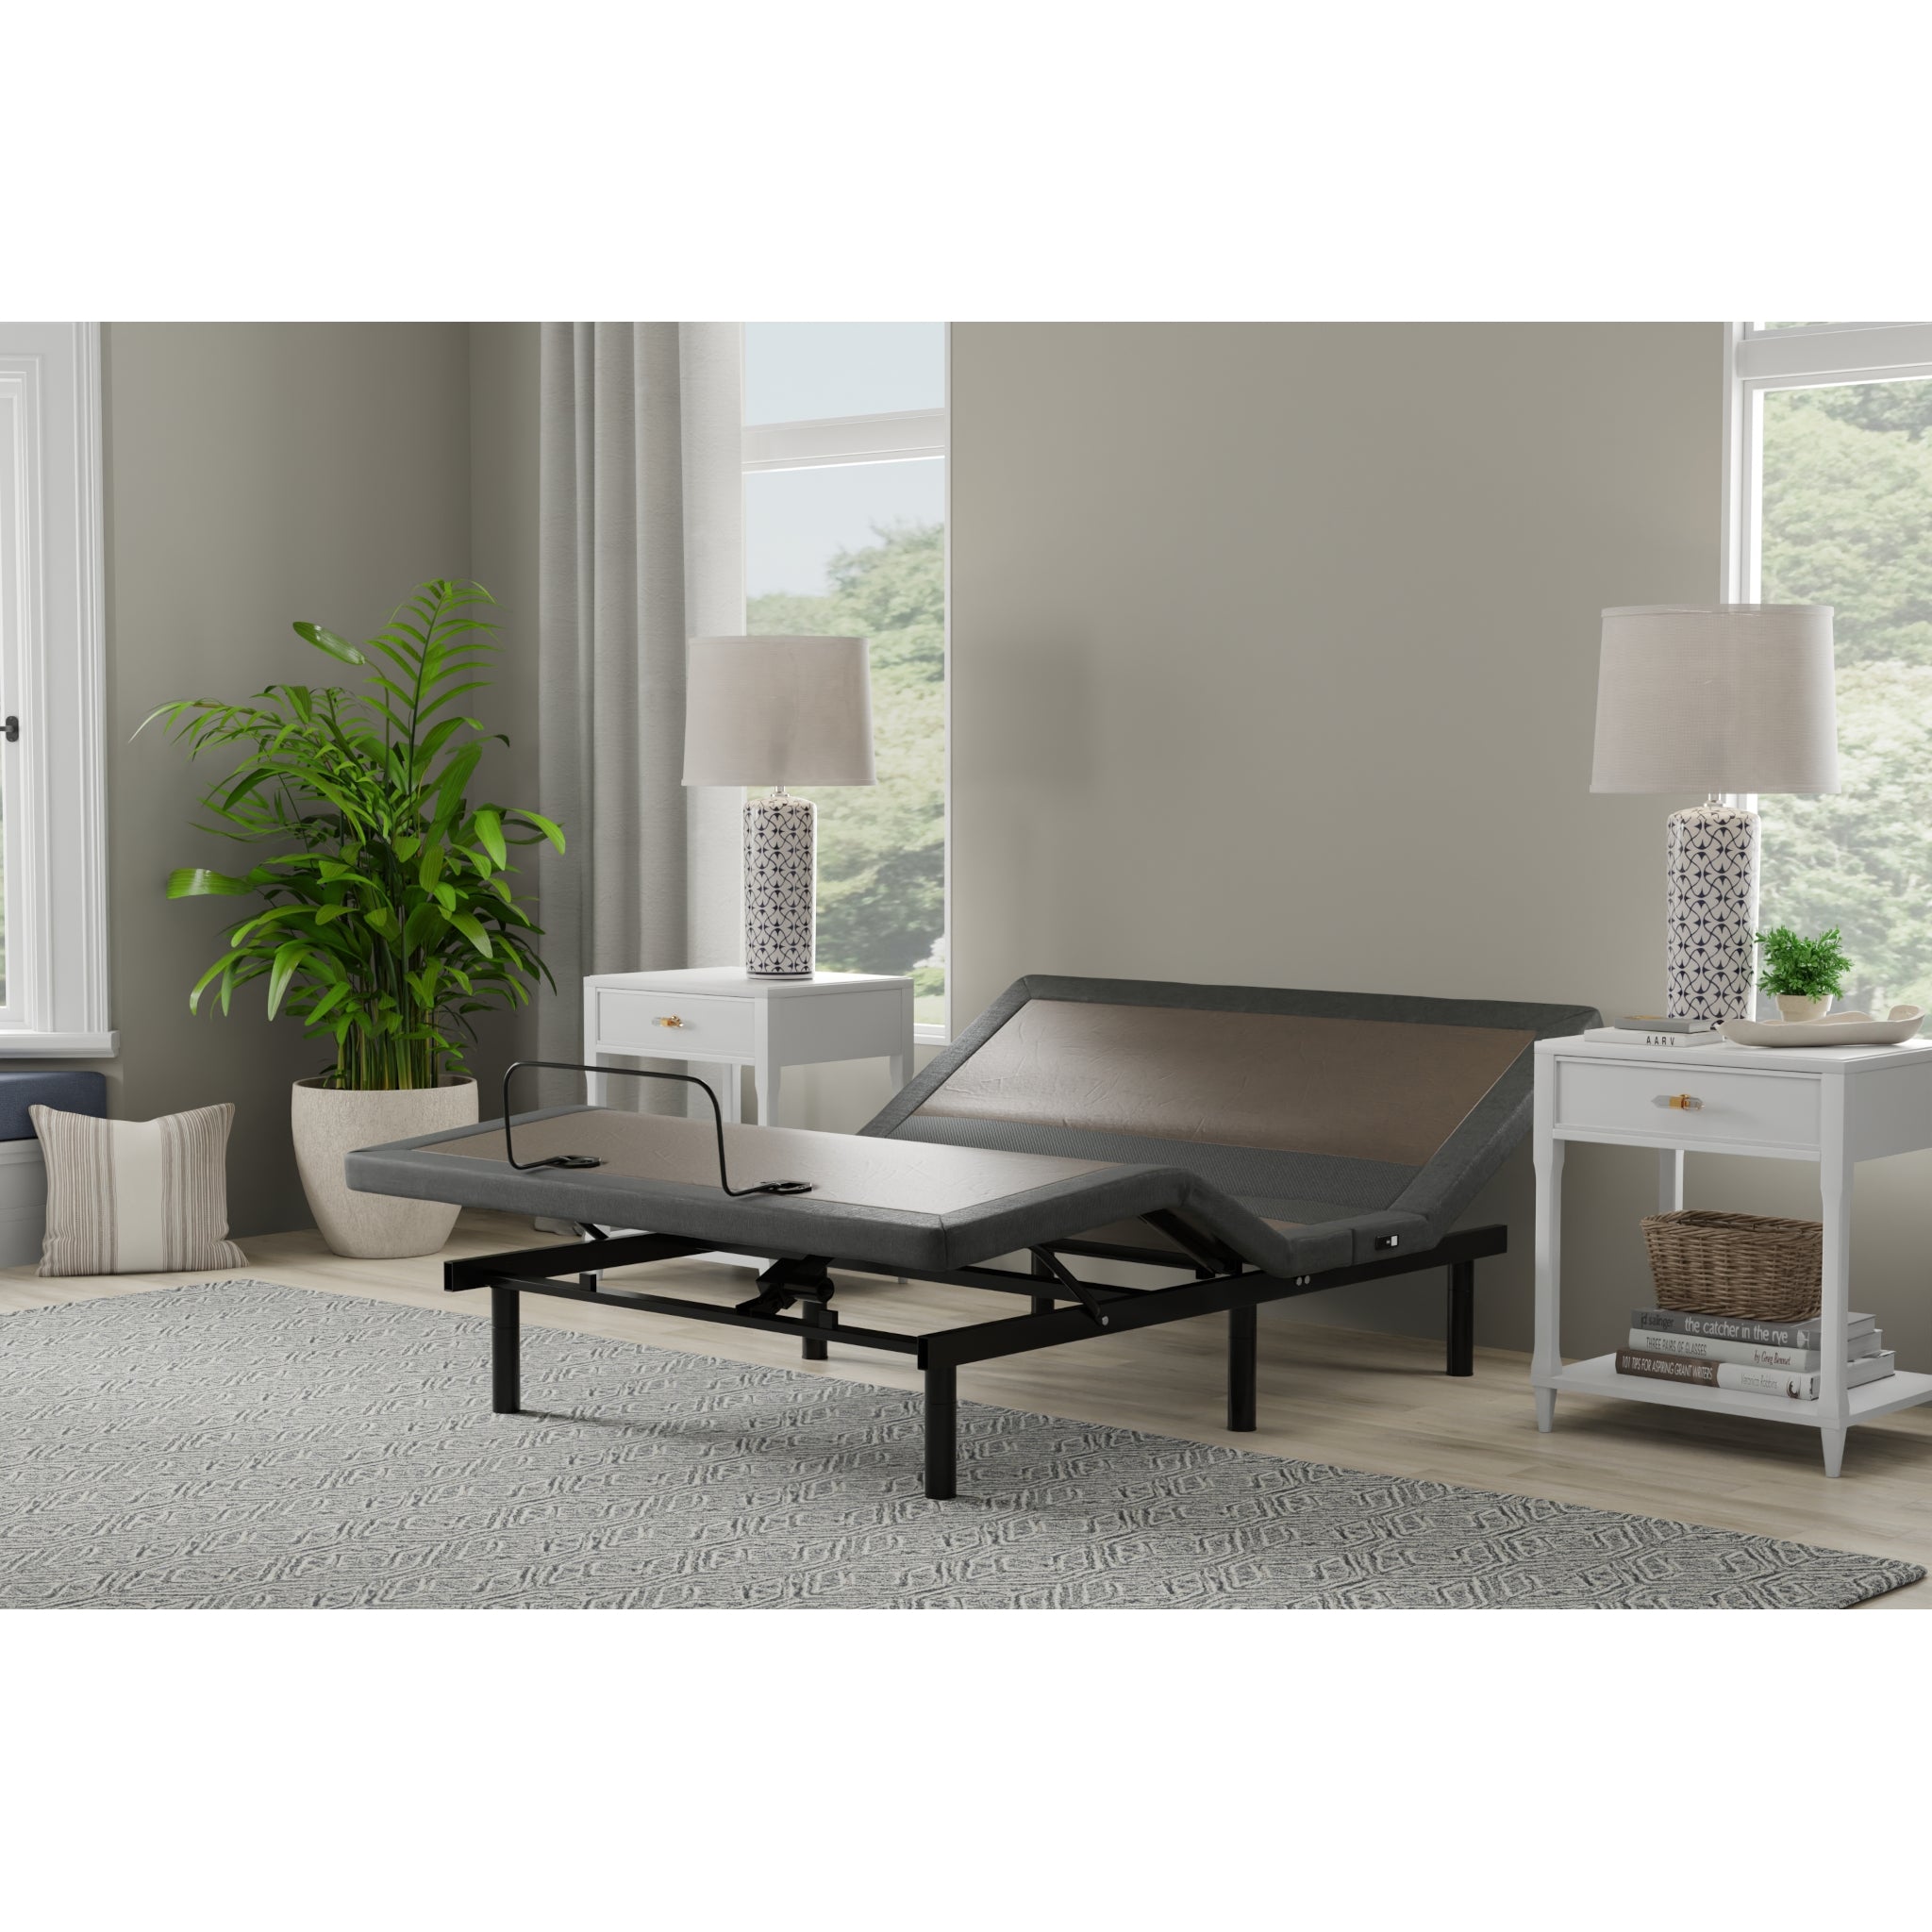 Classic Brands Adjustable Comfort Adjustable Bed Base with Massage,  Wireless Remote and USB Ports, Twin XL : : Home